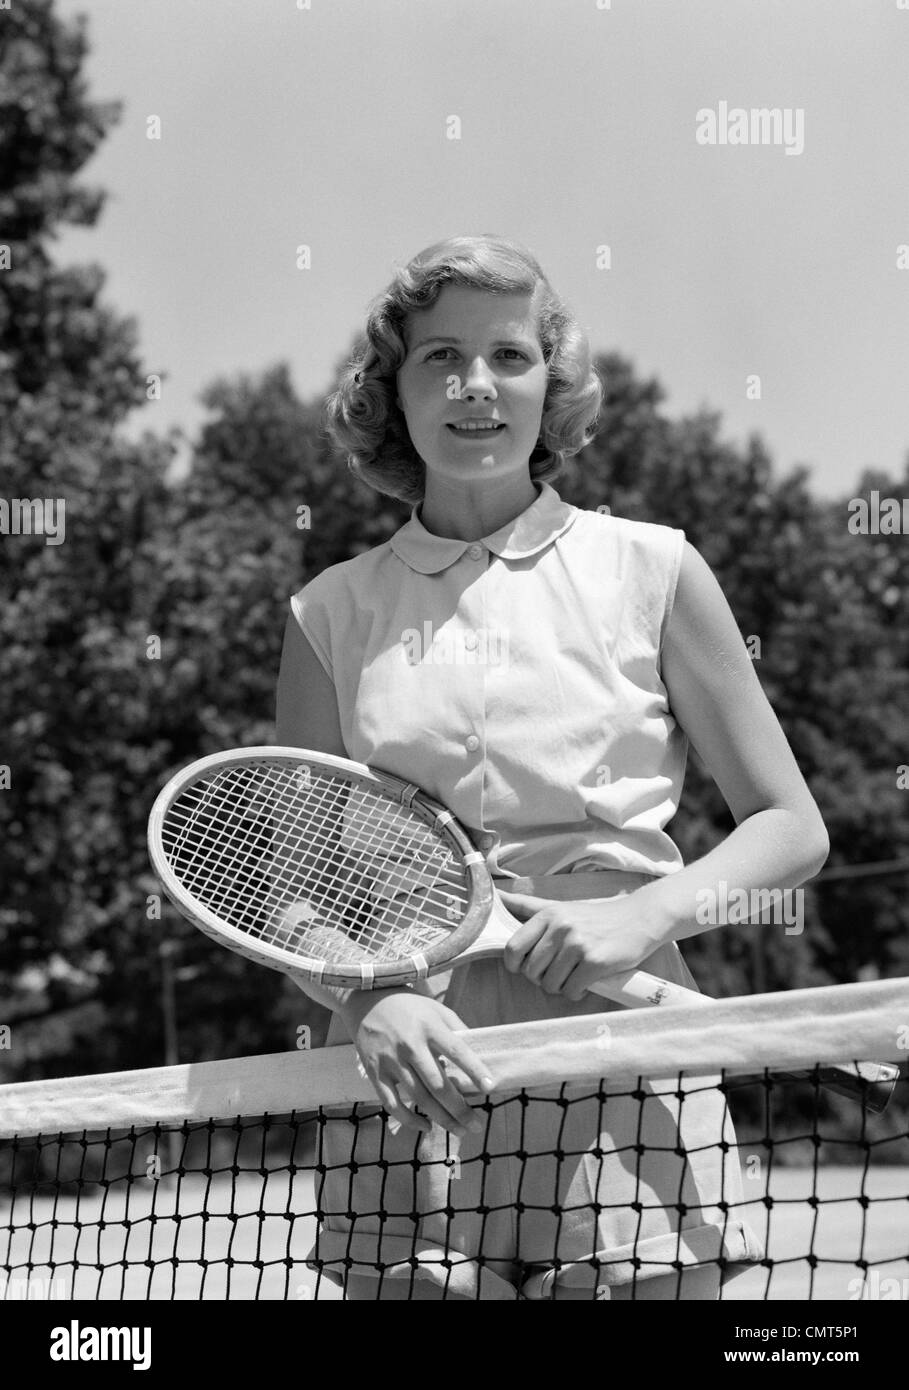 1950s PORTRAIT WOMAN HOLDING TENNIS RACQUET STANDING BEHIND NET OUTDOOR LOOKING AT CAMERA Stock Photo